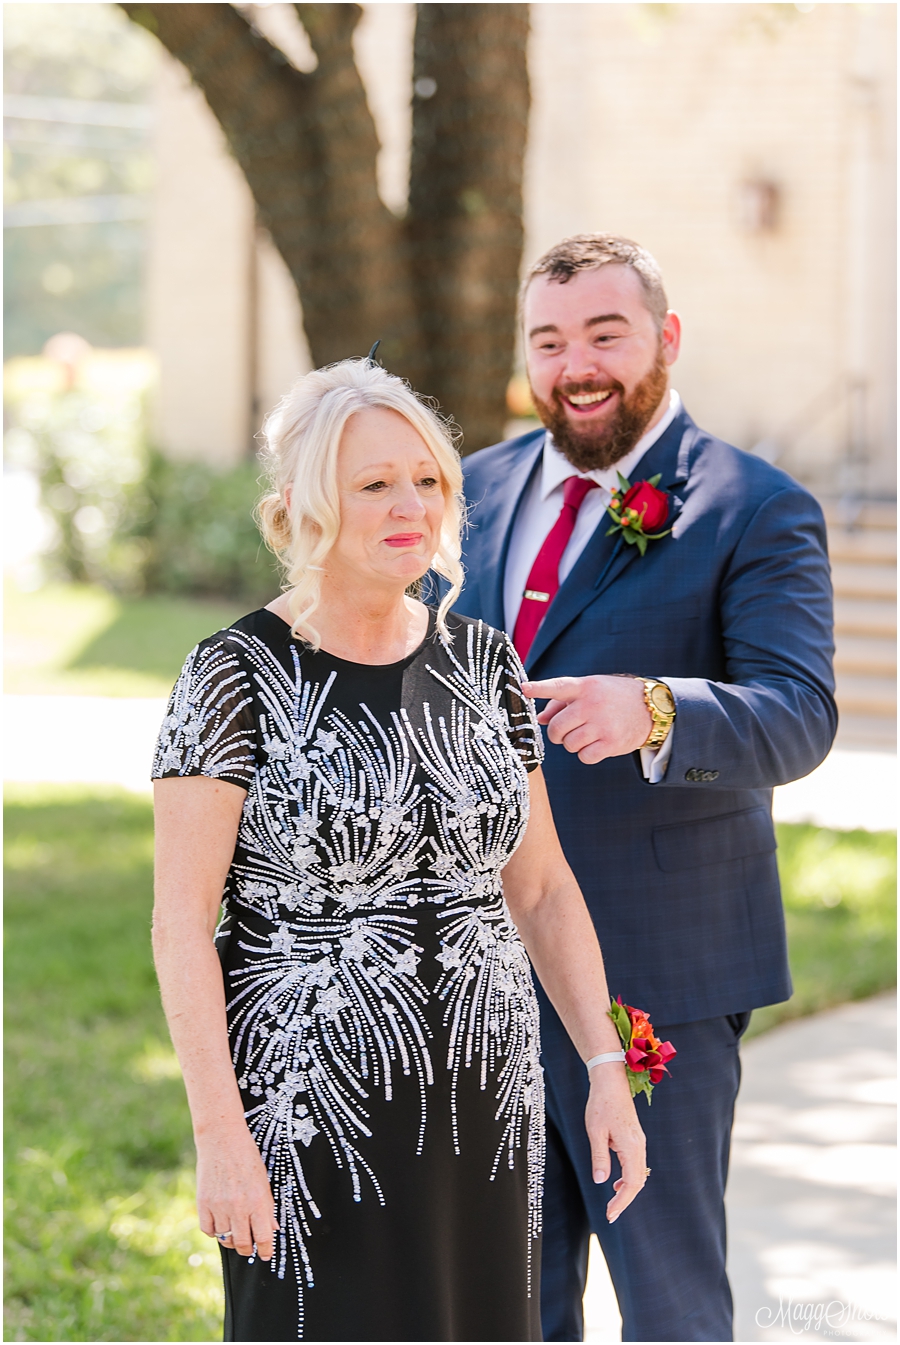 MaggShots Photography, DFW Wedding Photographer, Belo Mansion, Wedding Photographer, Belo Mansion, Wedding Photographer, Dallas wedding, Belo Mansion Wedding, Trinity Groves Engagement, Klyde Warren Park Engagement, Trinity Groves Photographyer, groom, first look